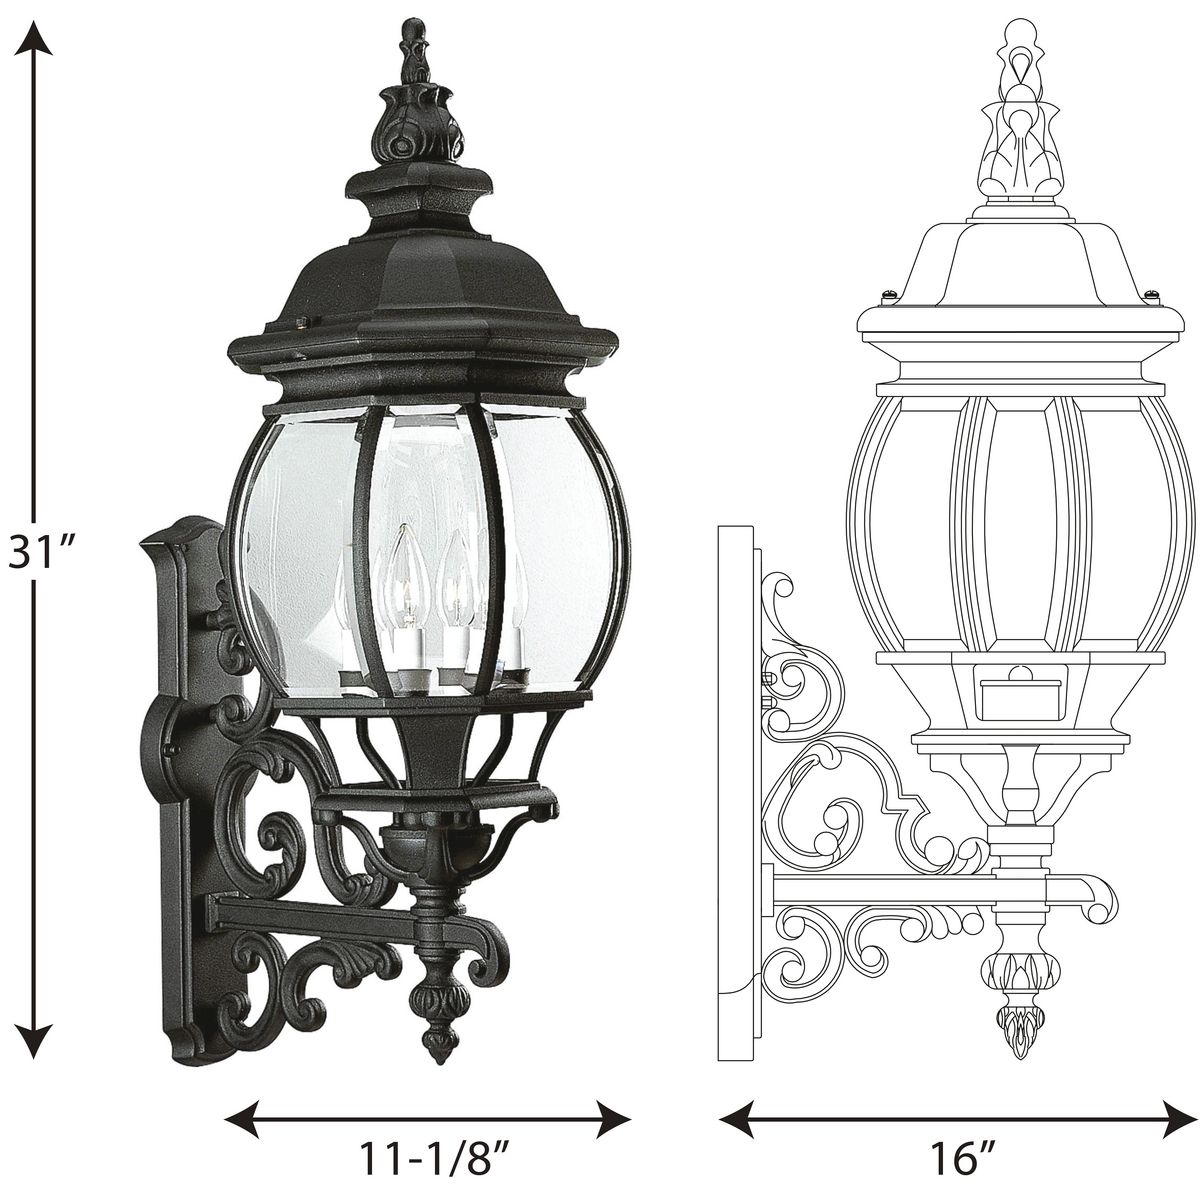 Progress Lighting Onion Lantern Collection 4-Light Textured Black Clear  Beveled Glass Traditional Outdoor Post Lantern Light P5401-31 - The Home  Depot